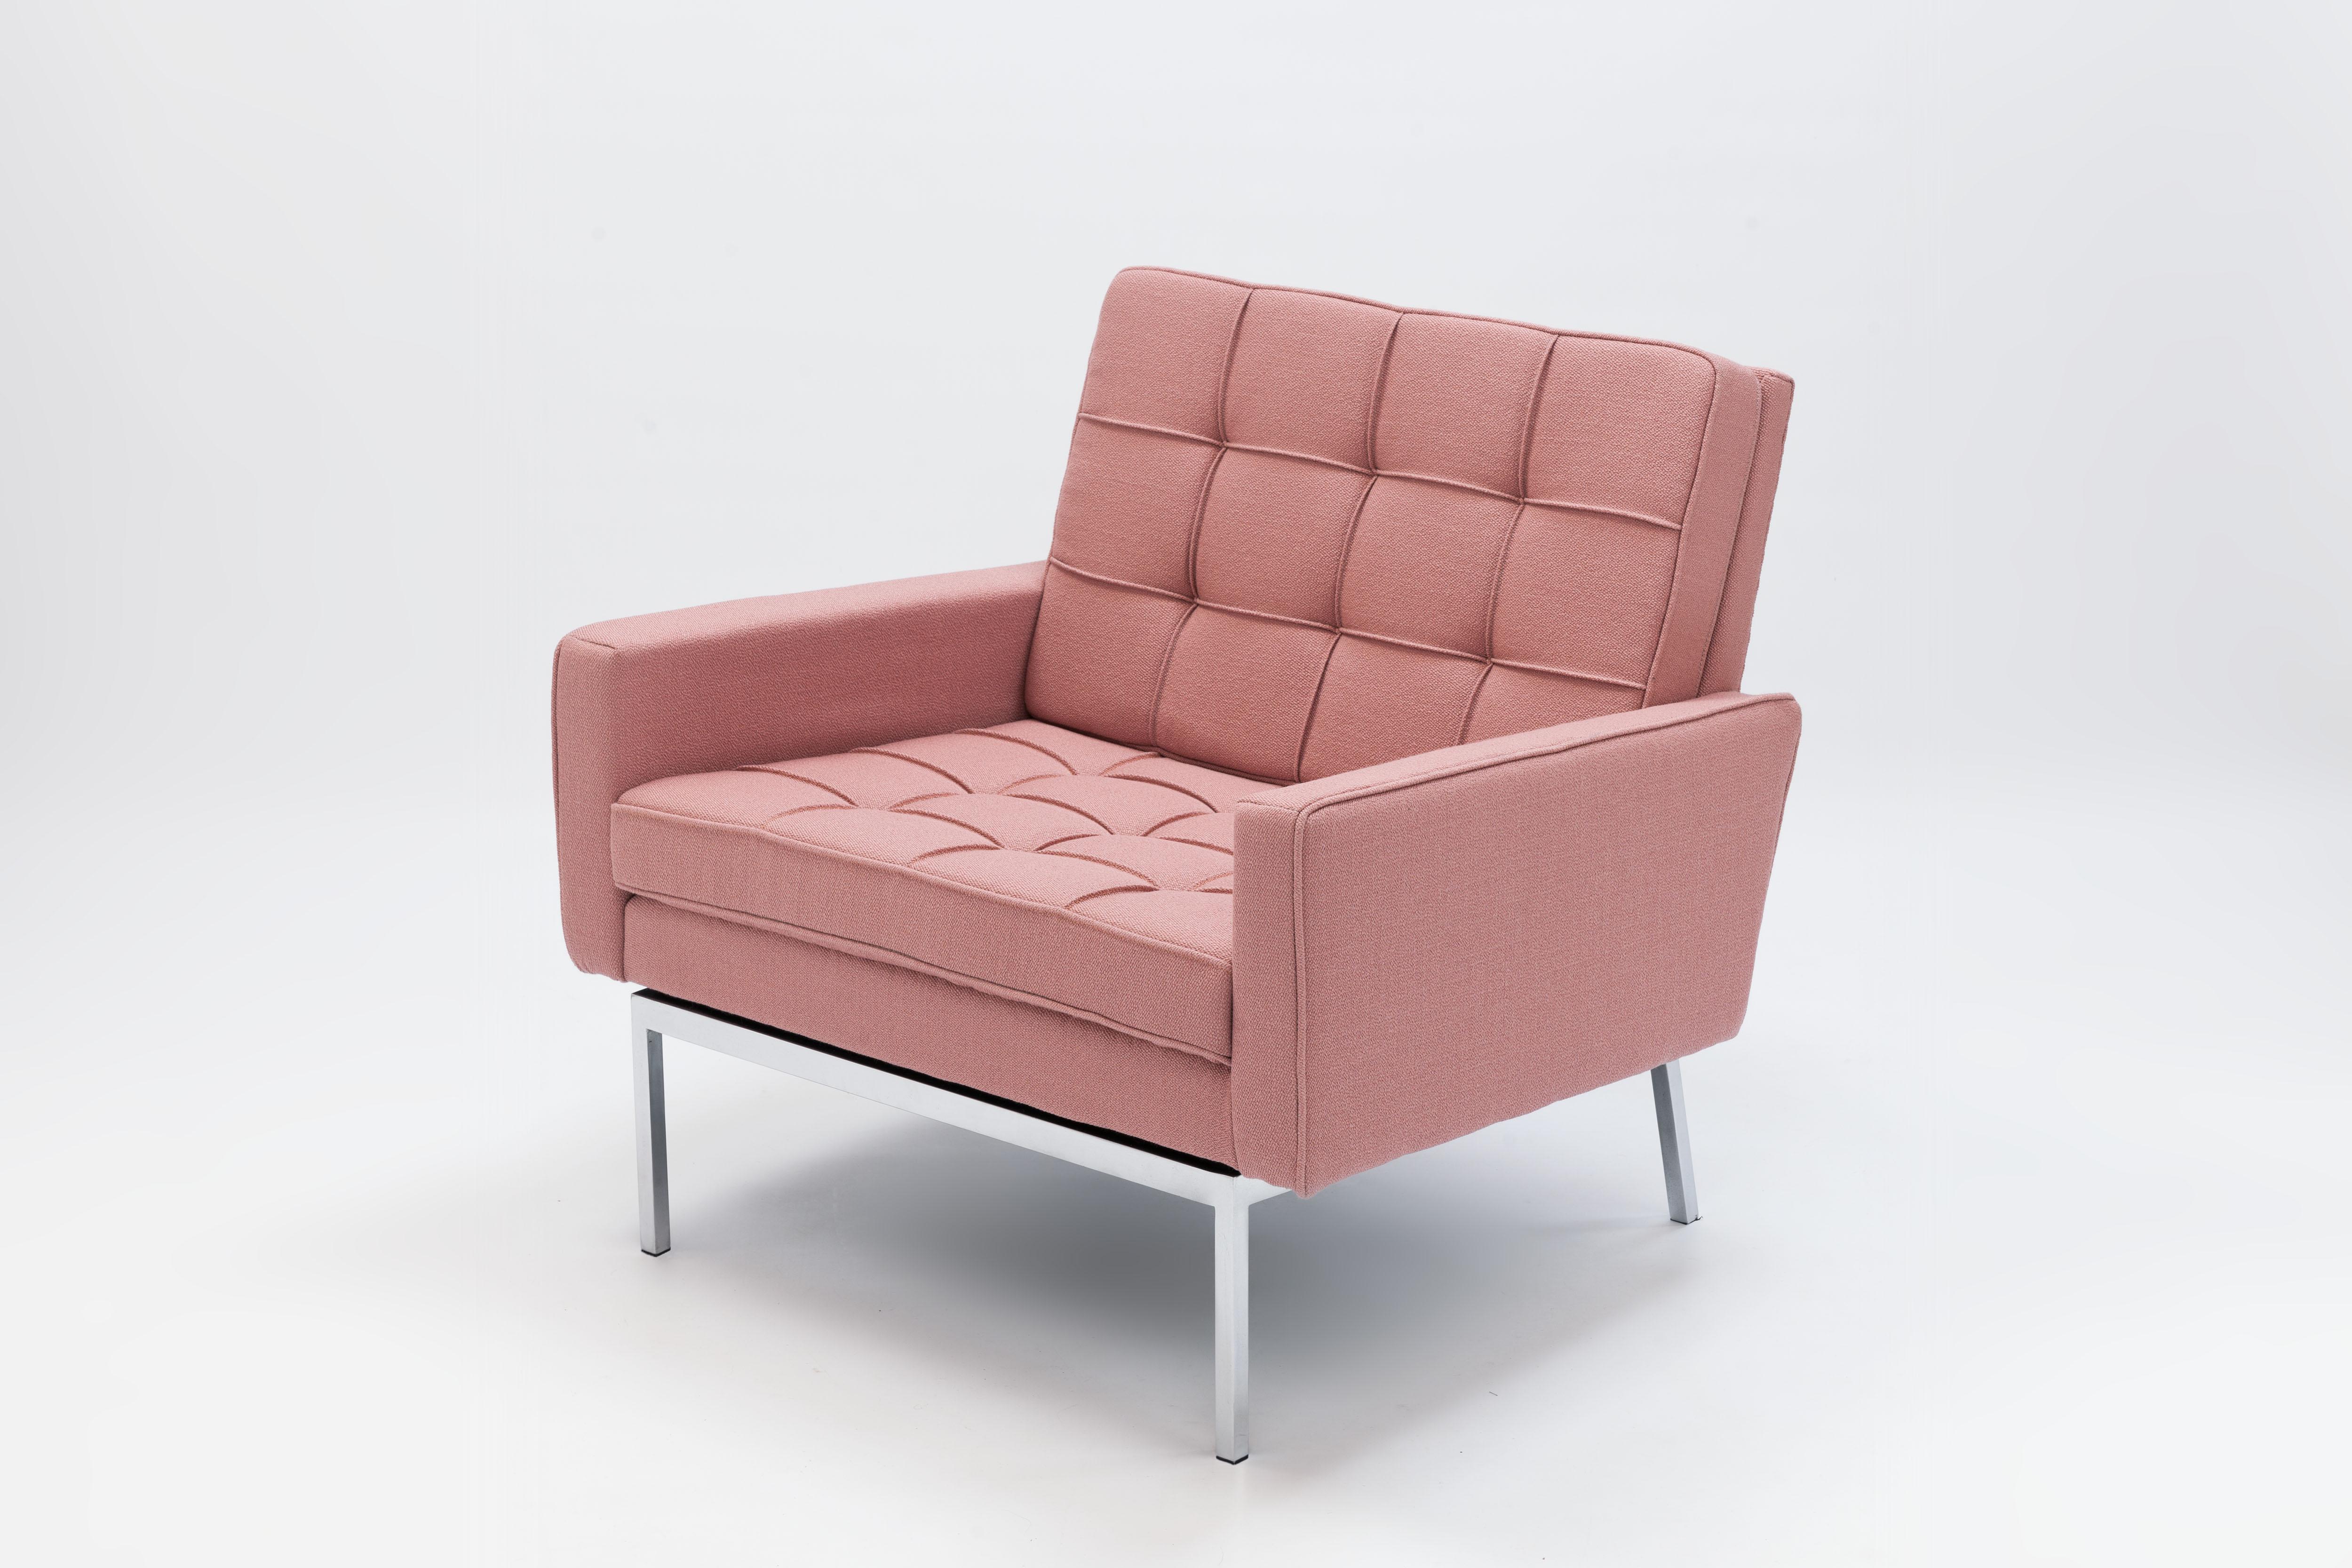 Model 65A arm chair is a design by Florence Knoll from 1956. The chair is part of a seating group that consisted of an armchair with or without armrests (slipper Chairs) and a sofa with or without armrests in a 2- or 3-seater version. This series,